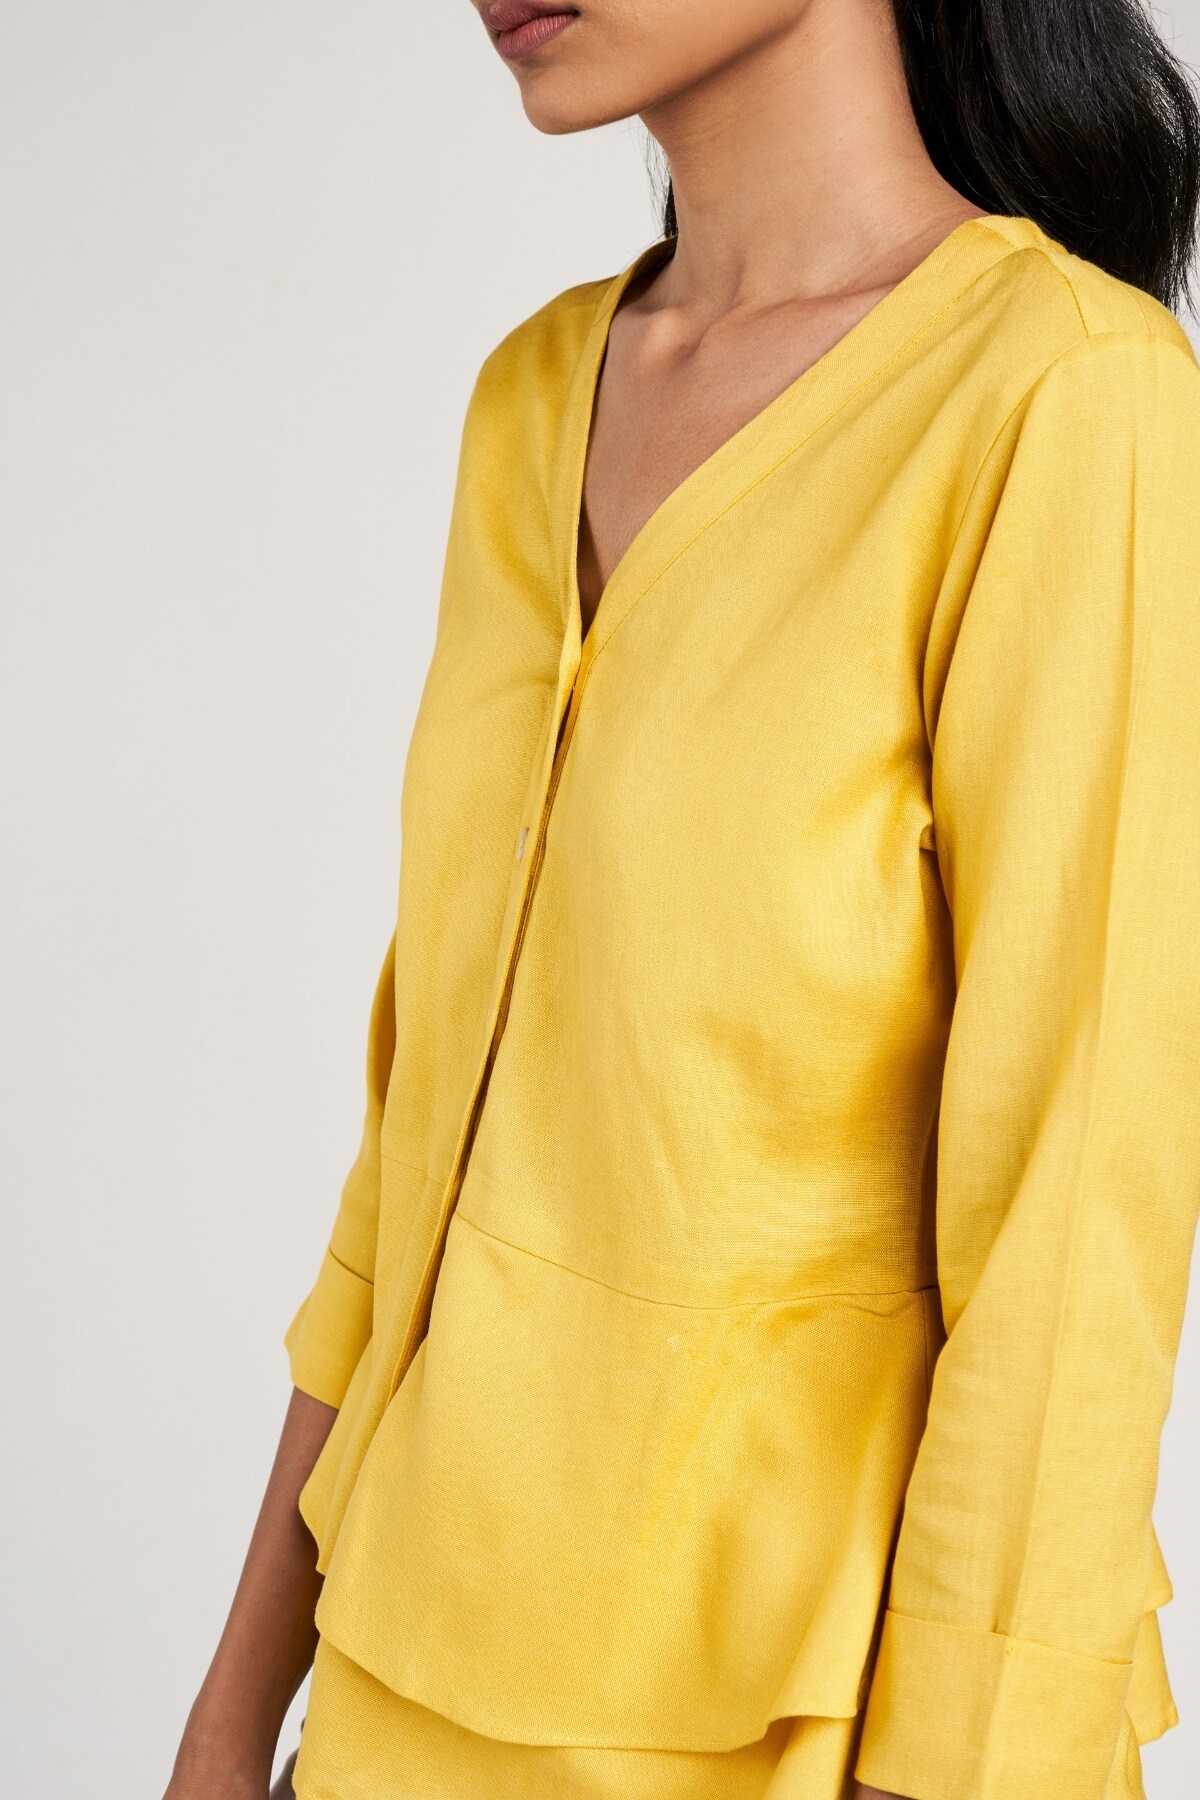 AND | Yellow Solid Peplum Top